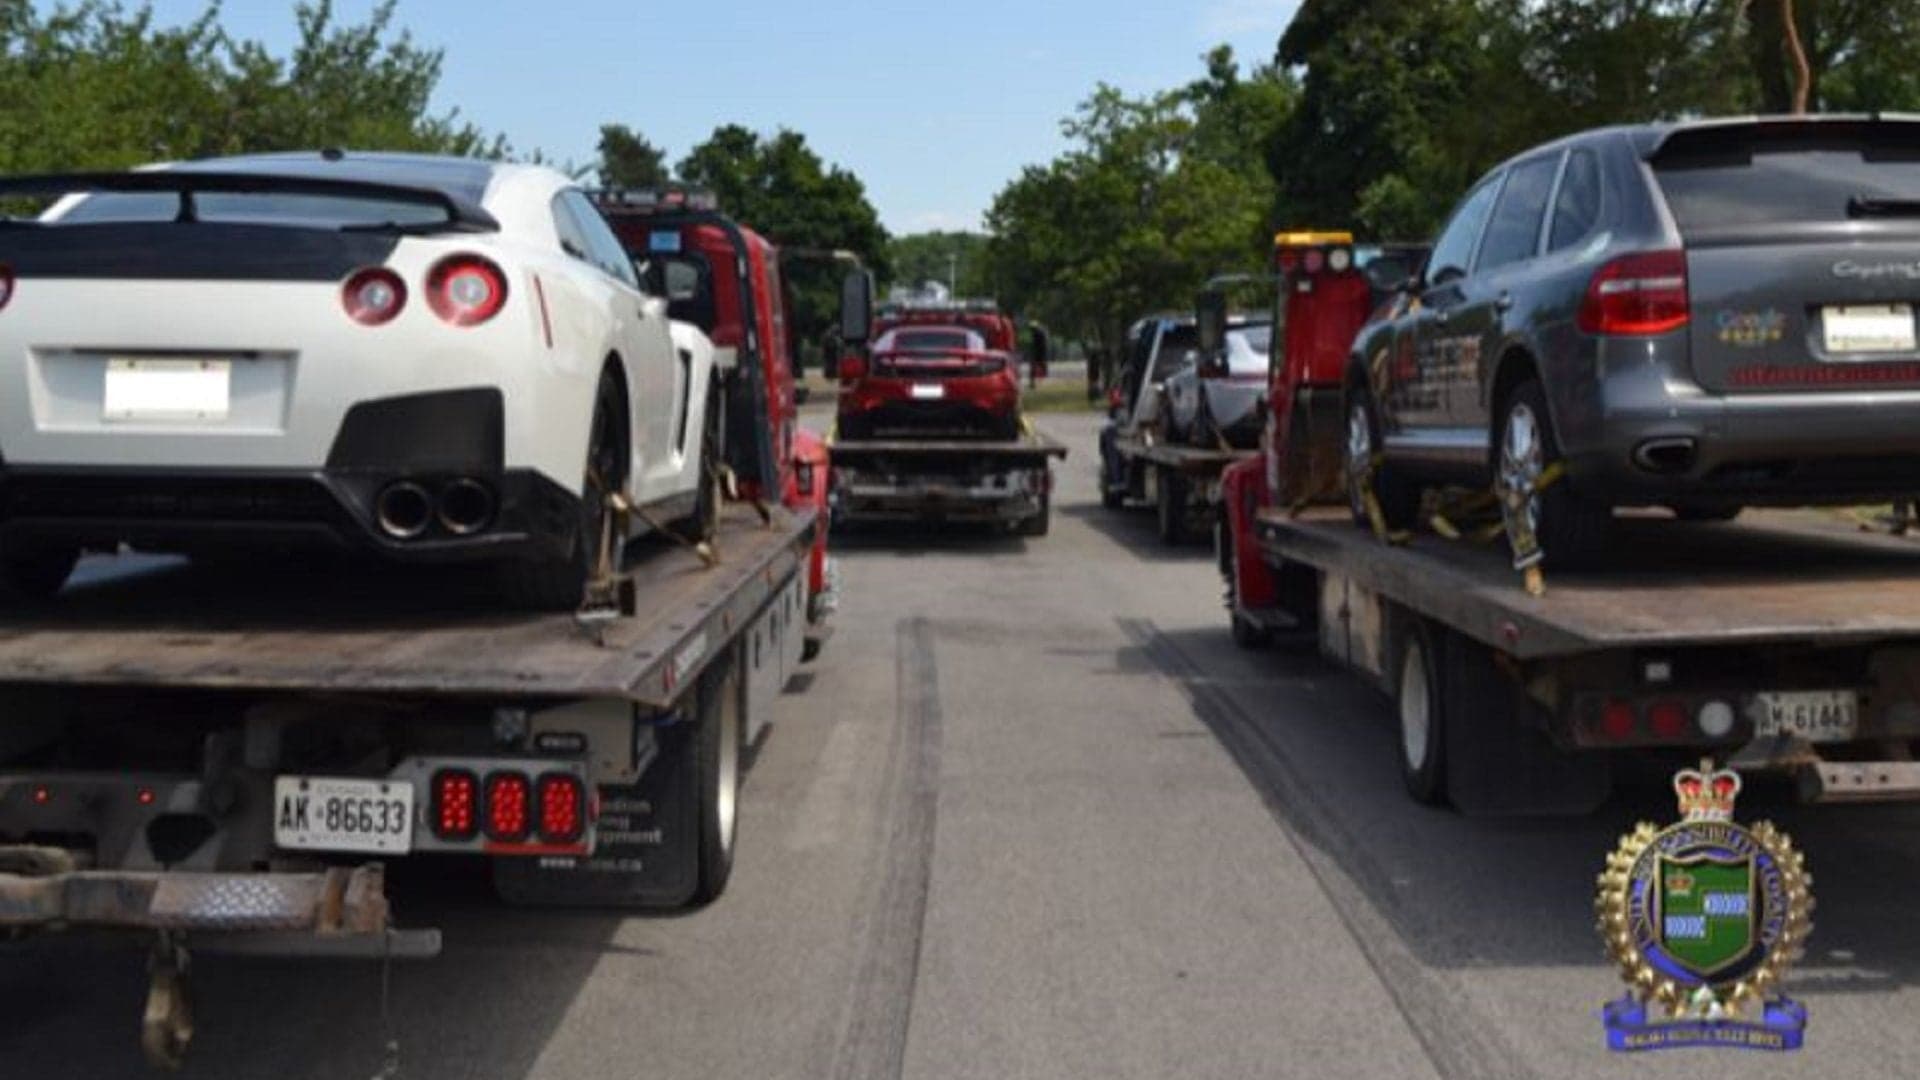 Canadian Police Seize 4 Cars on Supercar Tour Caught ‘Stunting’ in Niagara